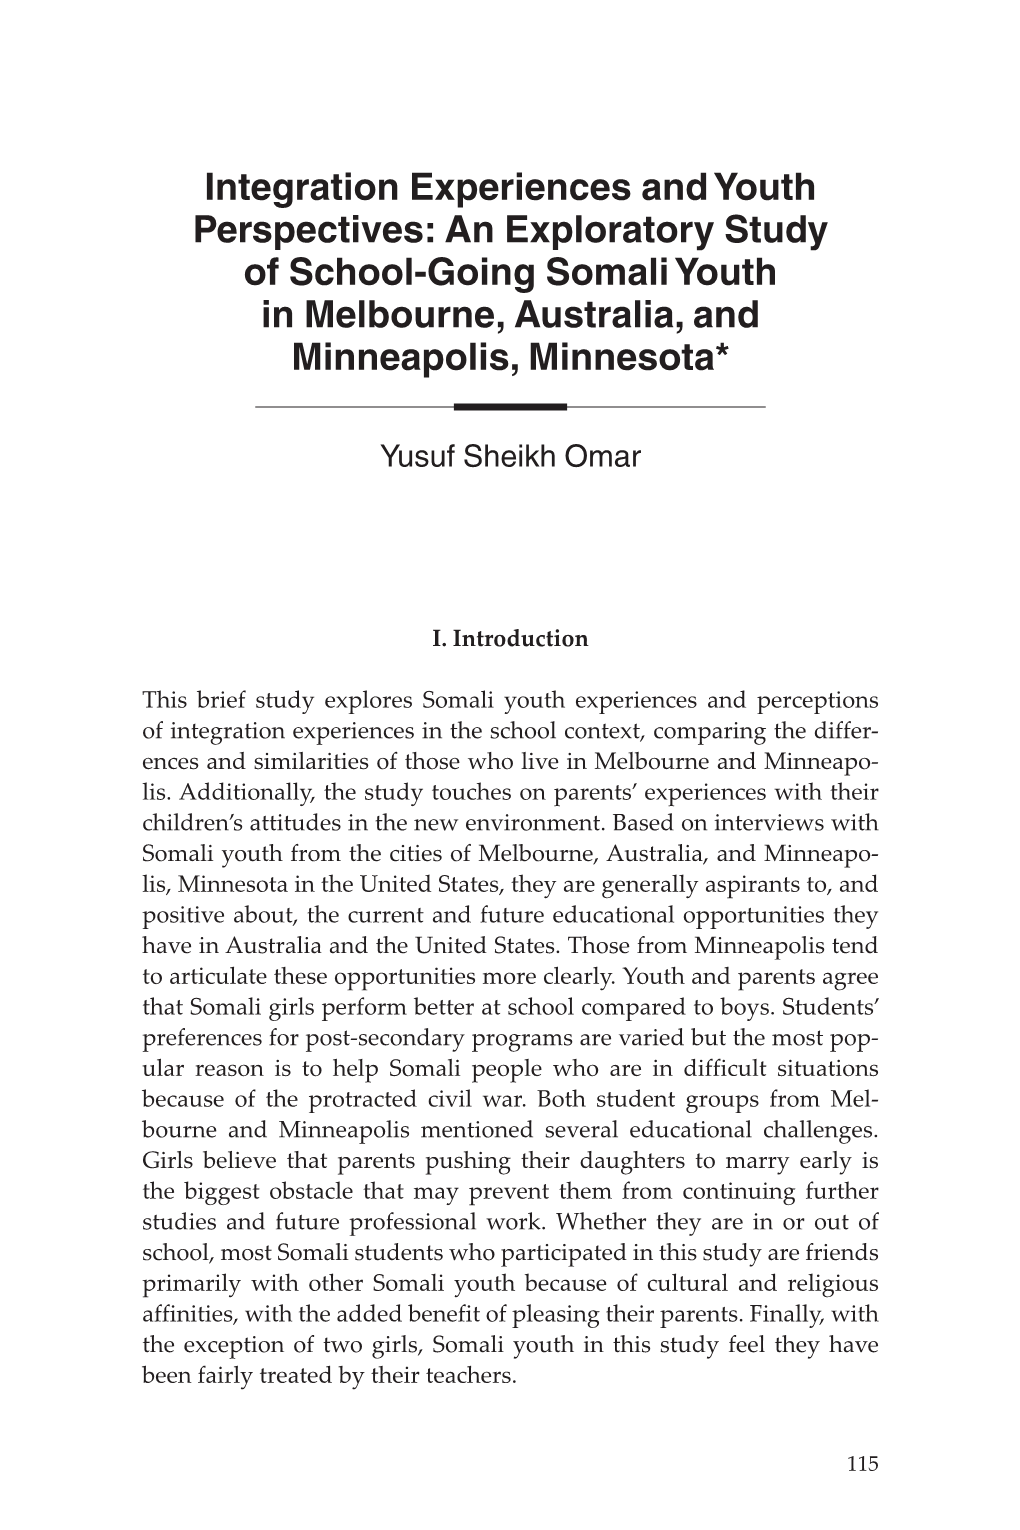 An Exploratory Study of School-Going Somali Youth in Melbourne, Australia, and Minneapolis, Minnesota*